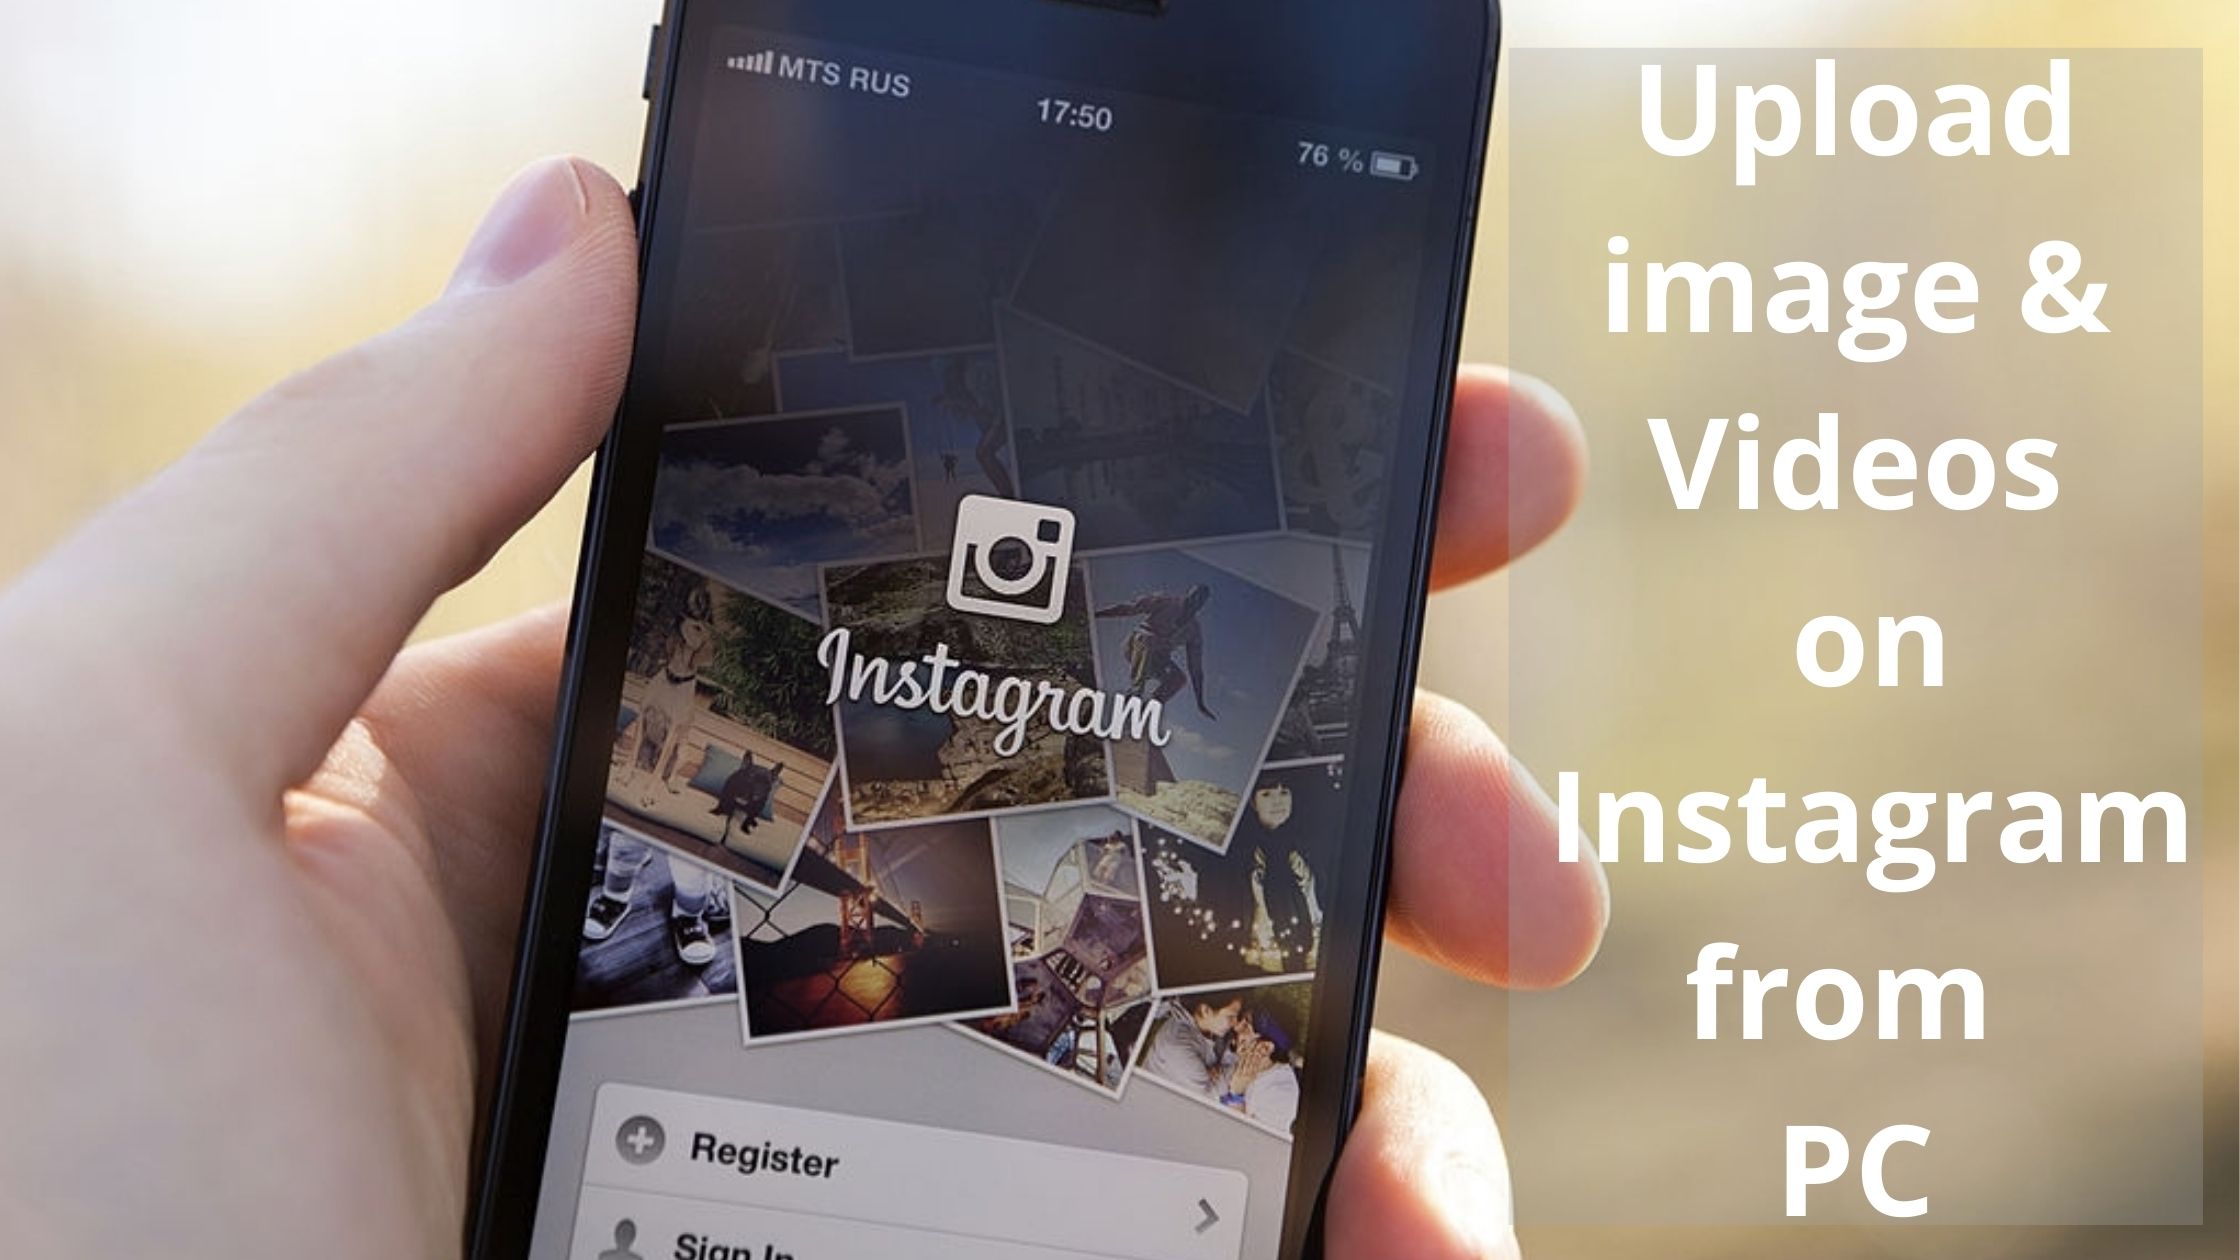 Upload images and videos on Instagram from PC for free